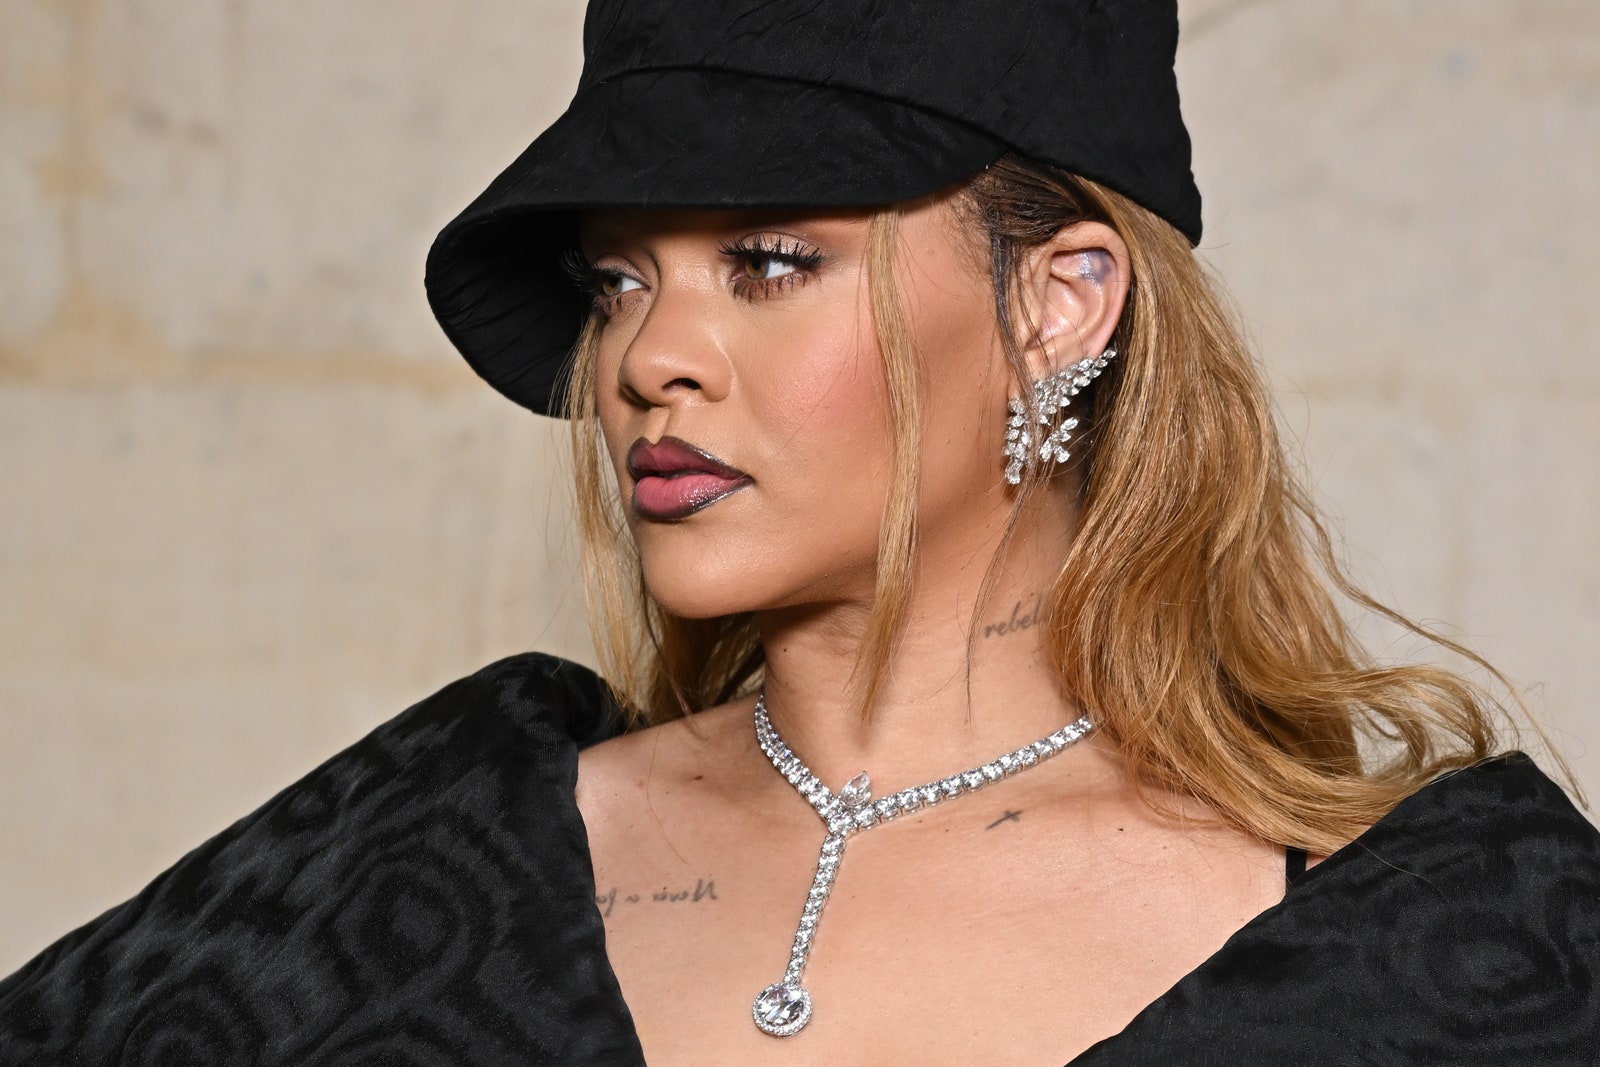 Only Rihanna Could Wear a Couture Newsboy Cap and Have It Look This Good